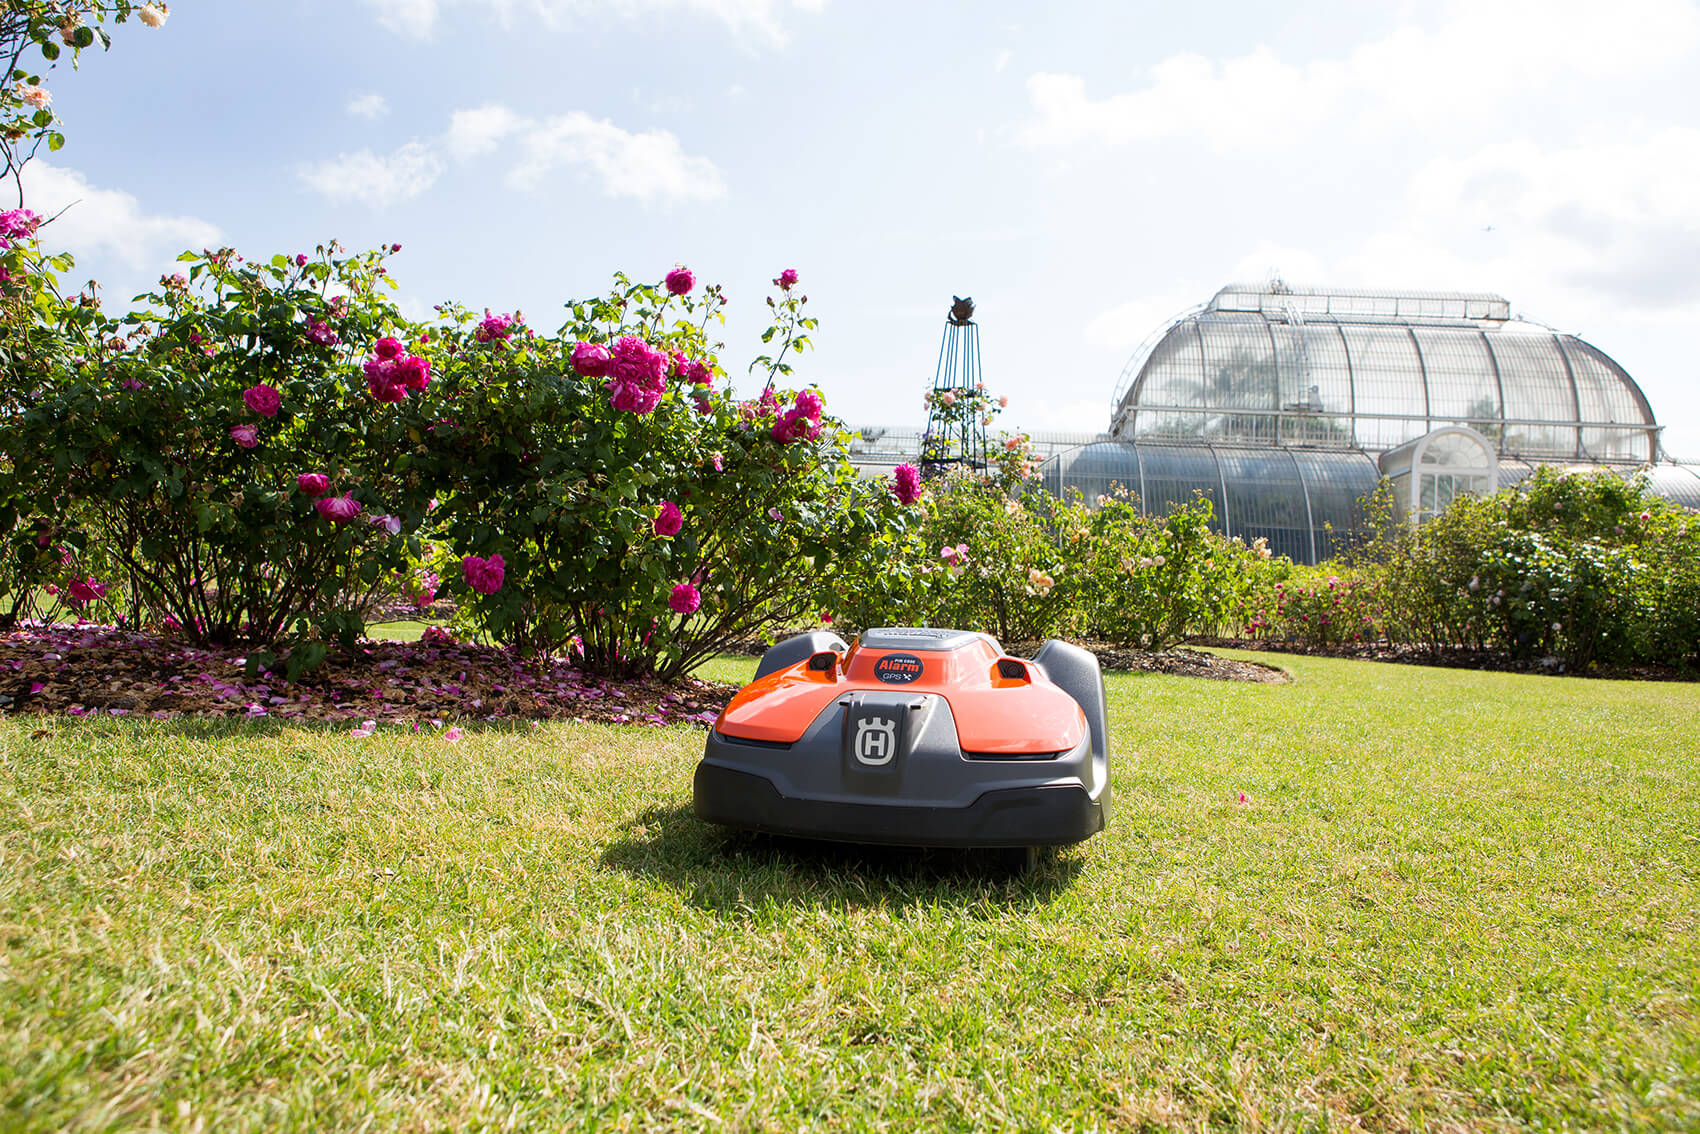 A lawn mower on grass in front of a greenhouse